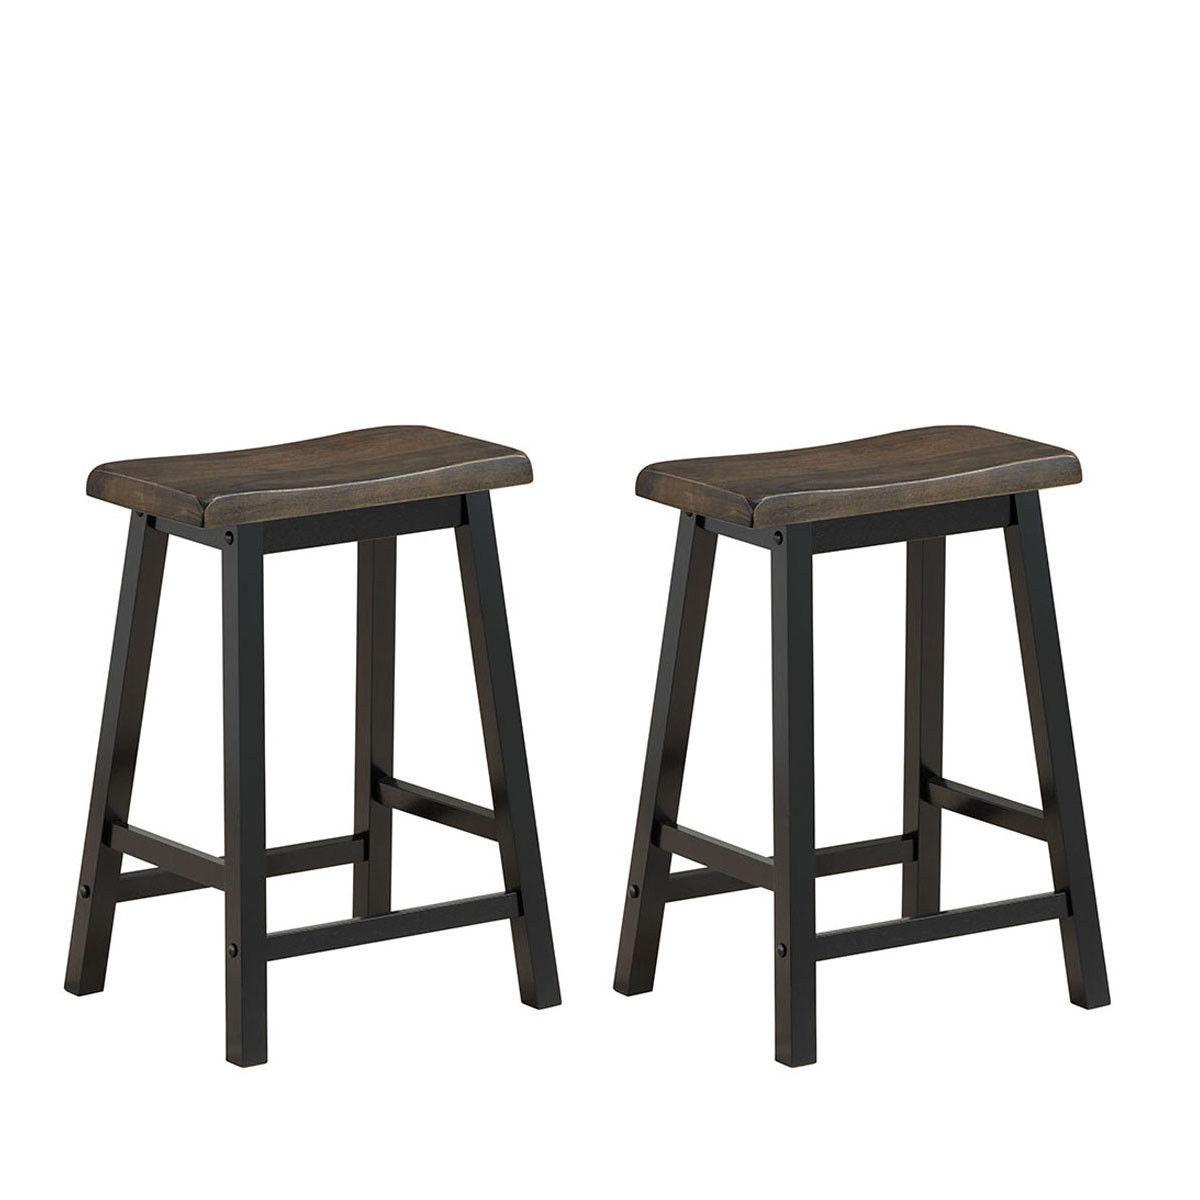 Set Of 2 Bar Stools 24''H Saddle Seat Pub Chair Home Kitchen Dining Room Gray